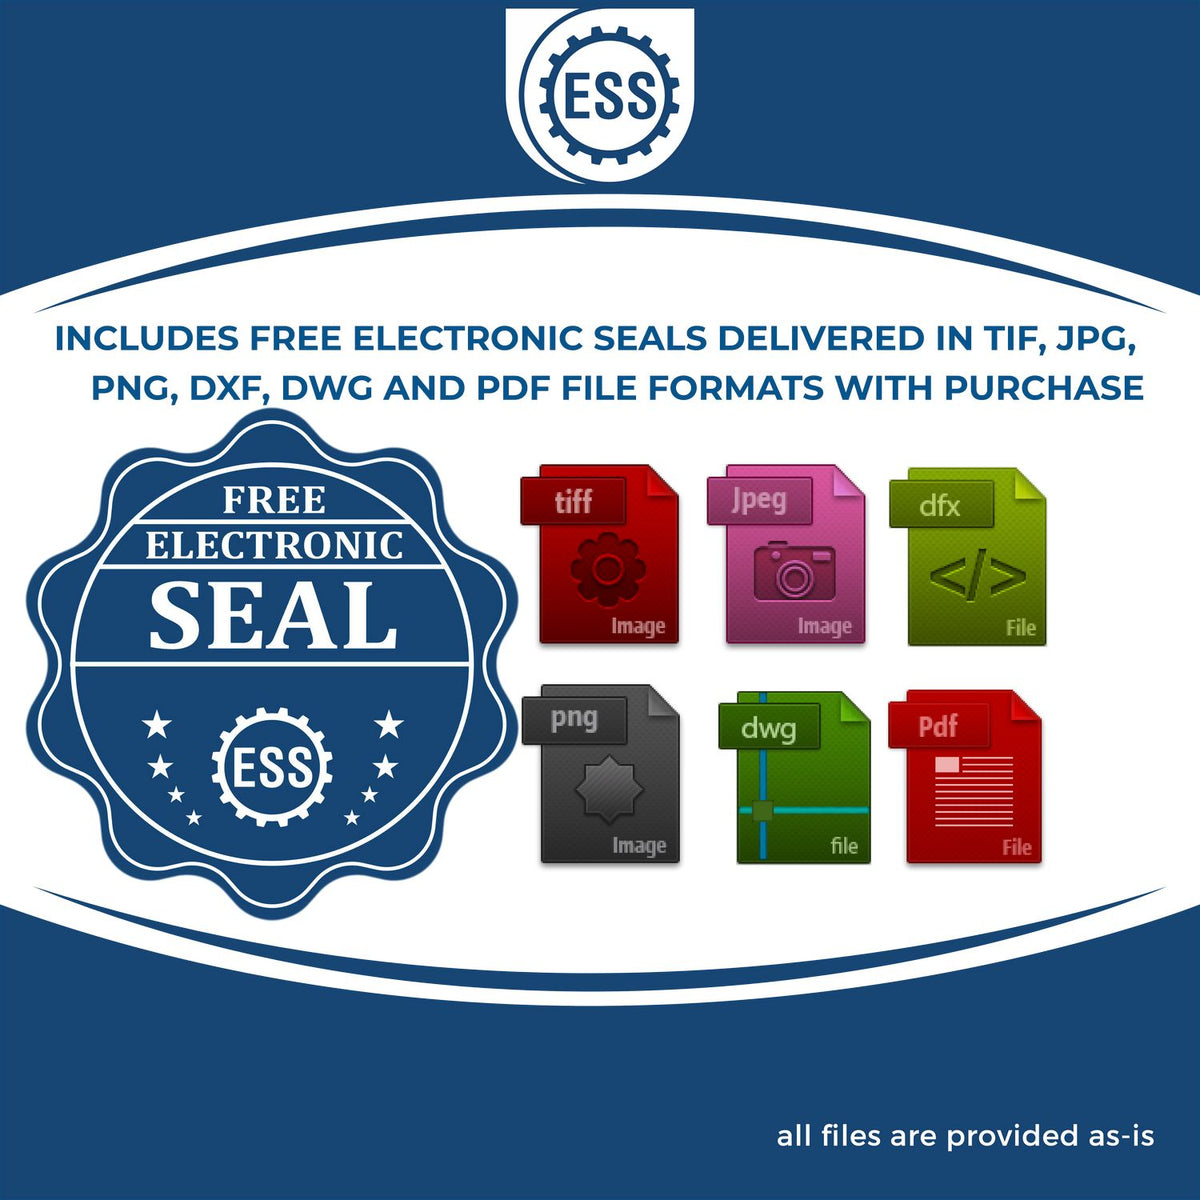 An infographic for the free electronic seal for the Wooden Handle South Carolina State Seal Notary Public Stamp illustrating the different file type icons such as DXF, DWG, TIF, JPG and PNG.